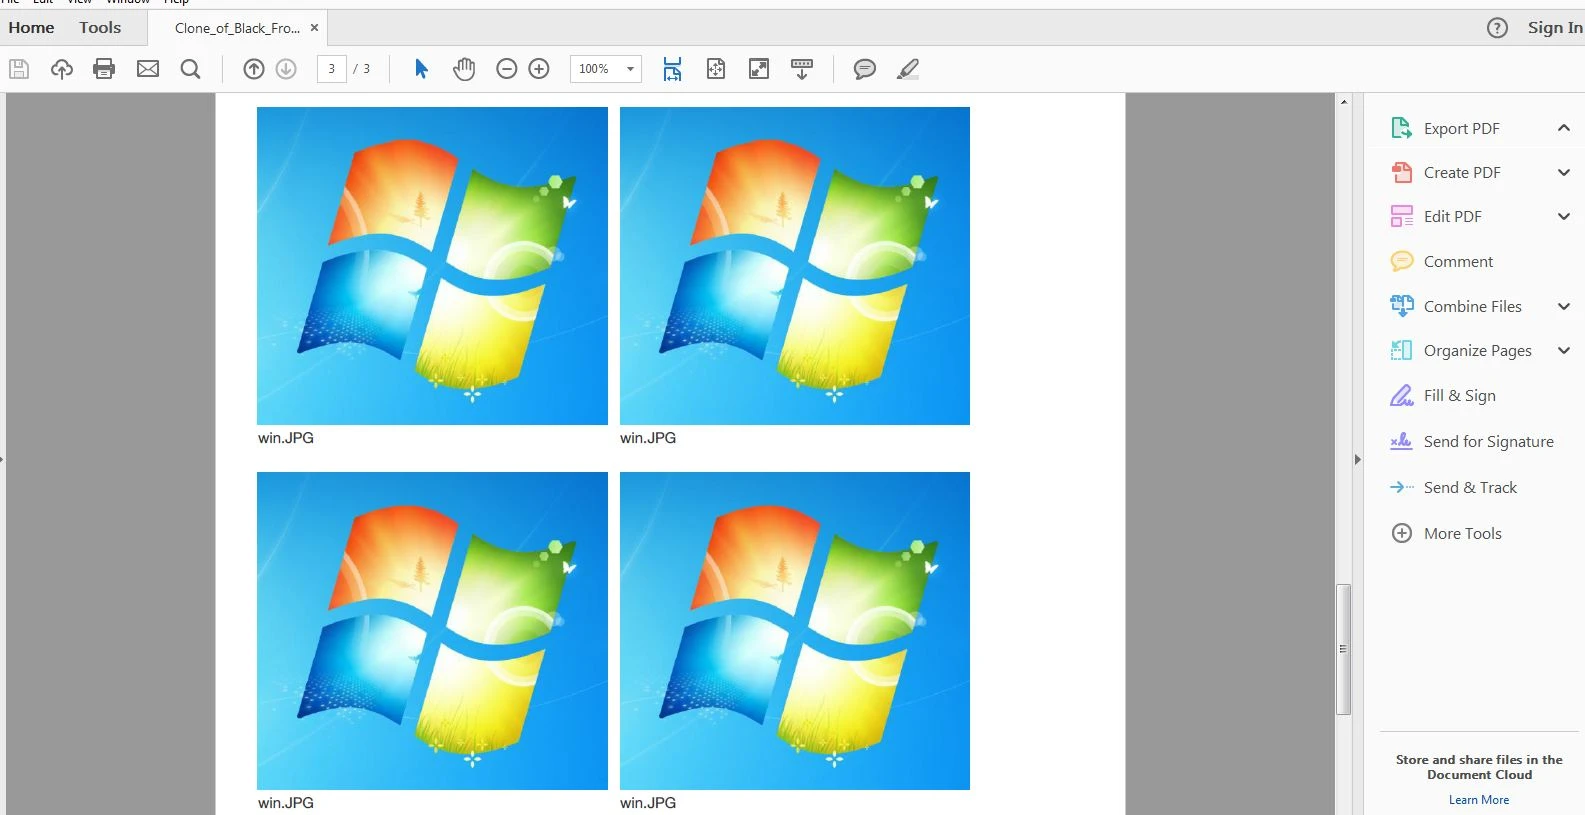 Can images in the pdf form which can be downloaded in the submission section be customized? Image 2 Screenshot 41